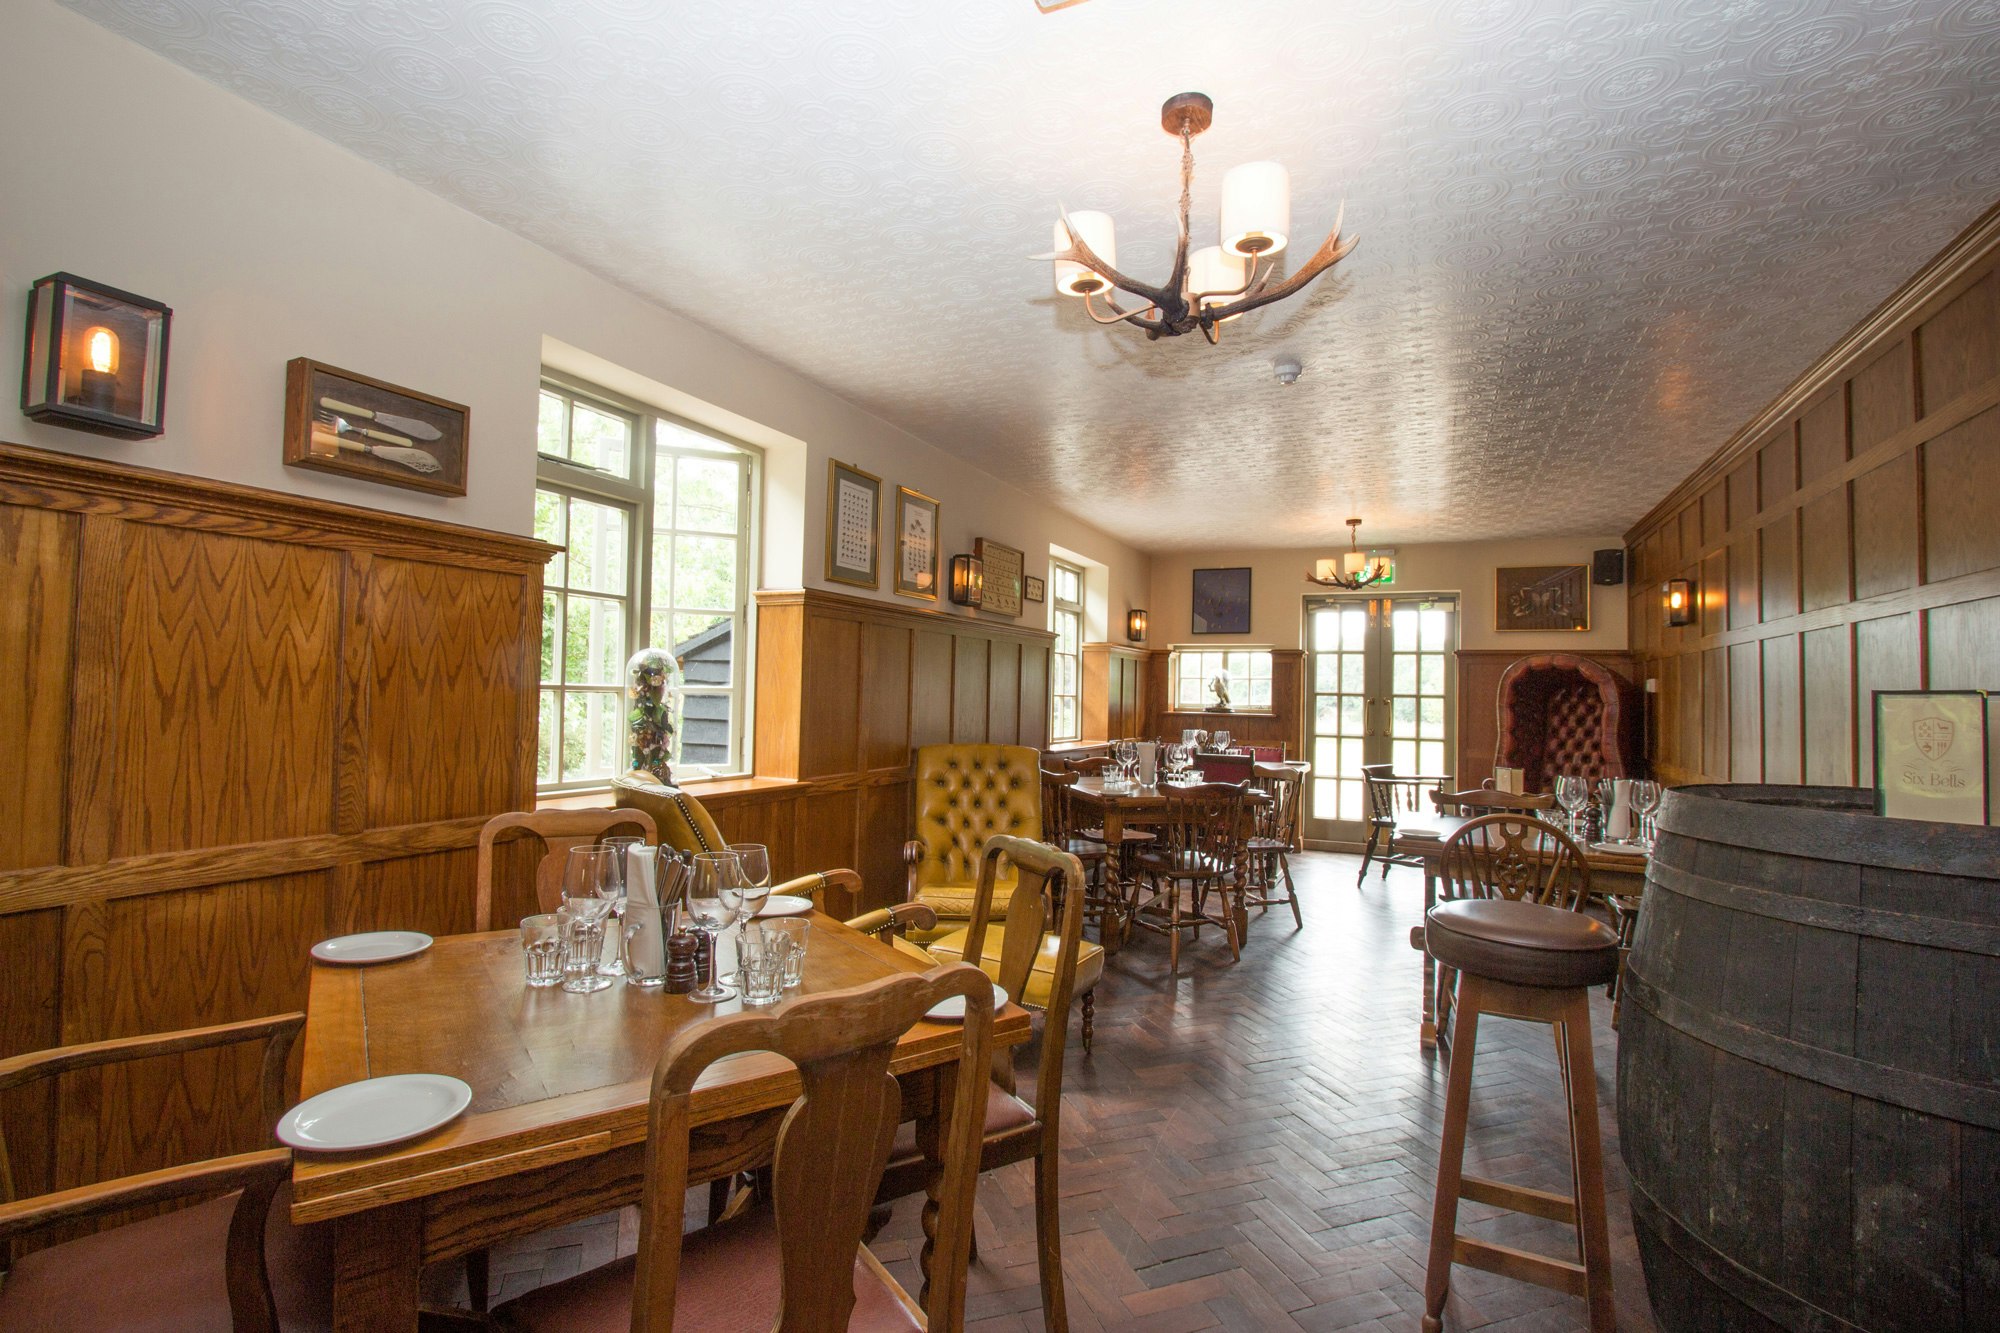 The Six Bells - Oak Room and Stag Room image 2